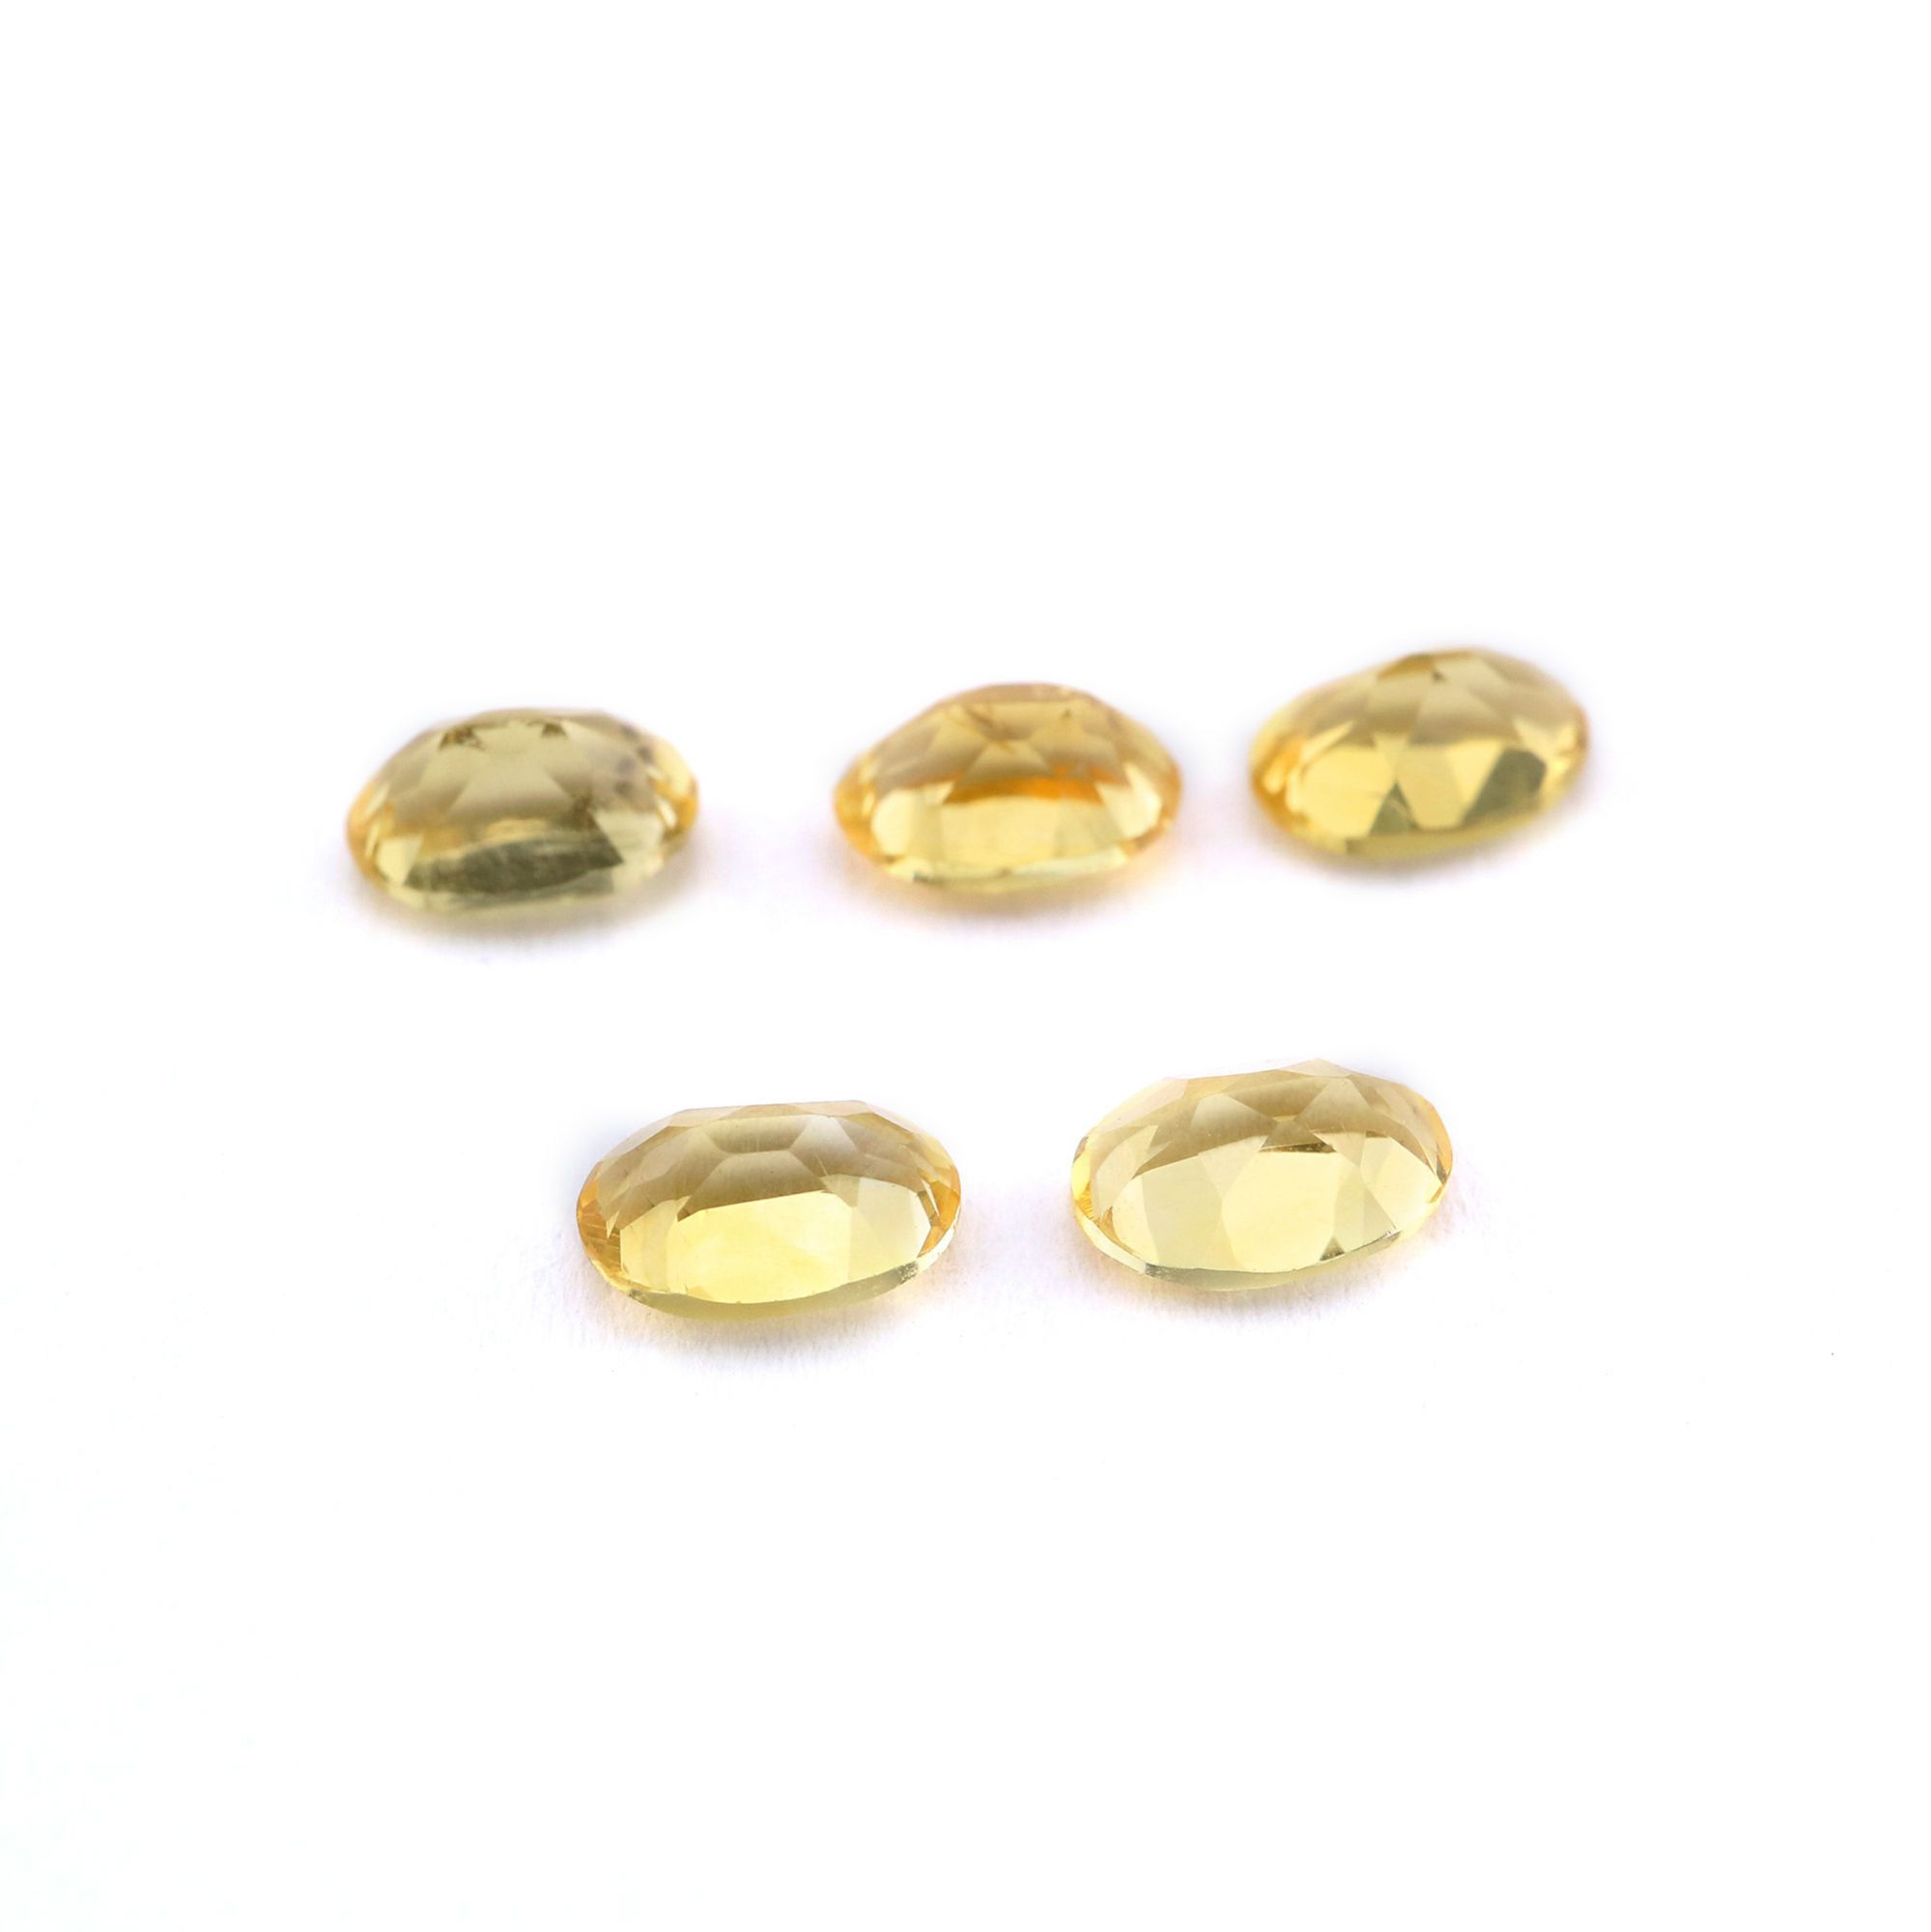 1Pcs Oval Yellow Citrine November Birthstone Faceted Cut Loose Gemstone Natural Semi Precious Stone DIY Jewelry Supplies 4120121 - Click Image to Close